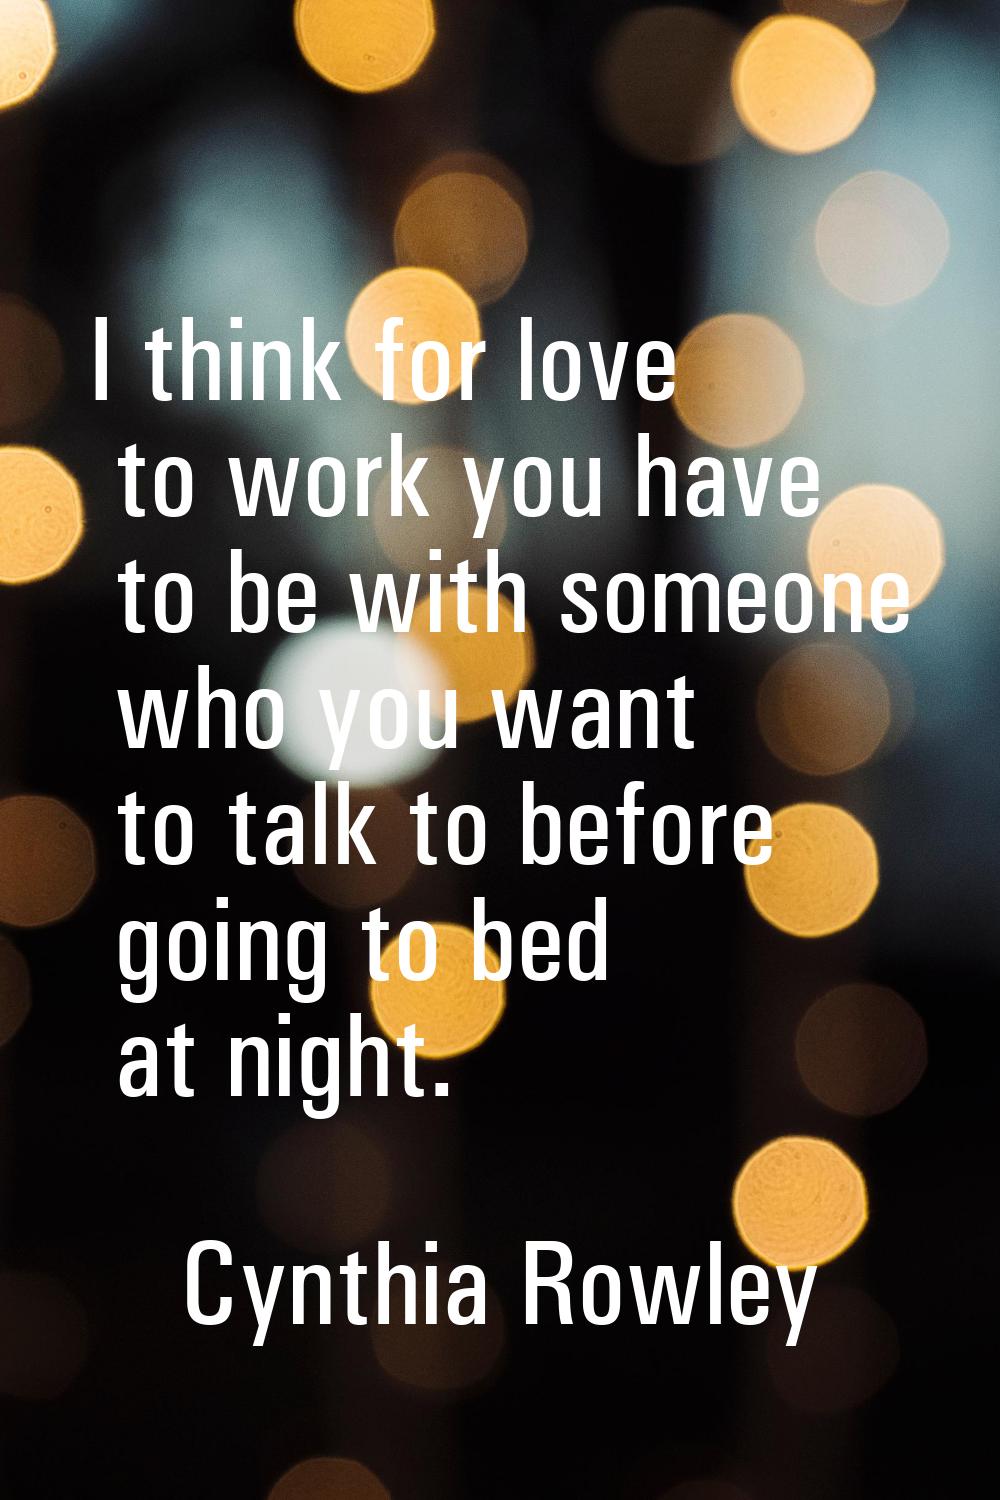 I think for love to work you have to be with someone who you want to talk to before going to bed at